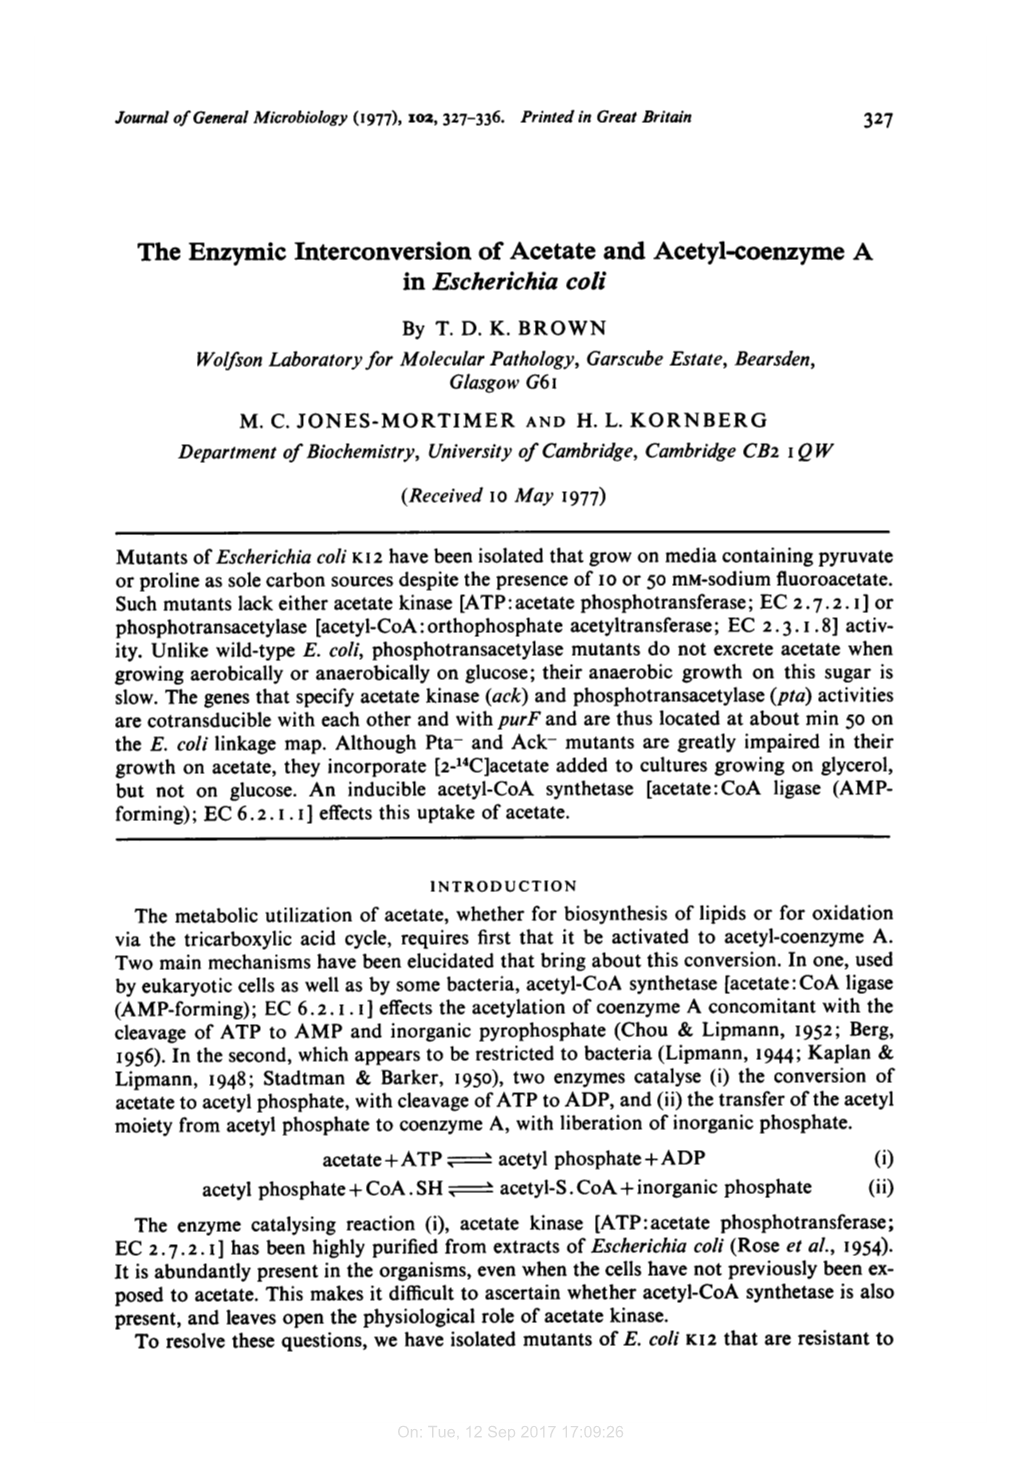 The Enzymic Interconversion of Acetate and Acetyl-Coenzyme a in Escherichia Coli